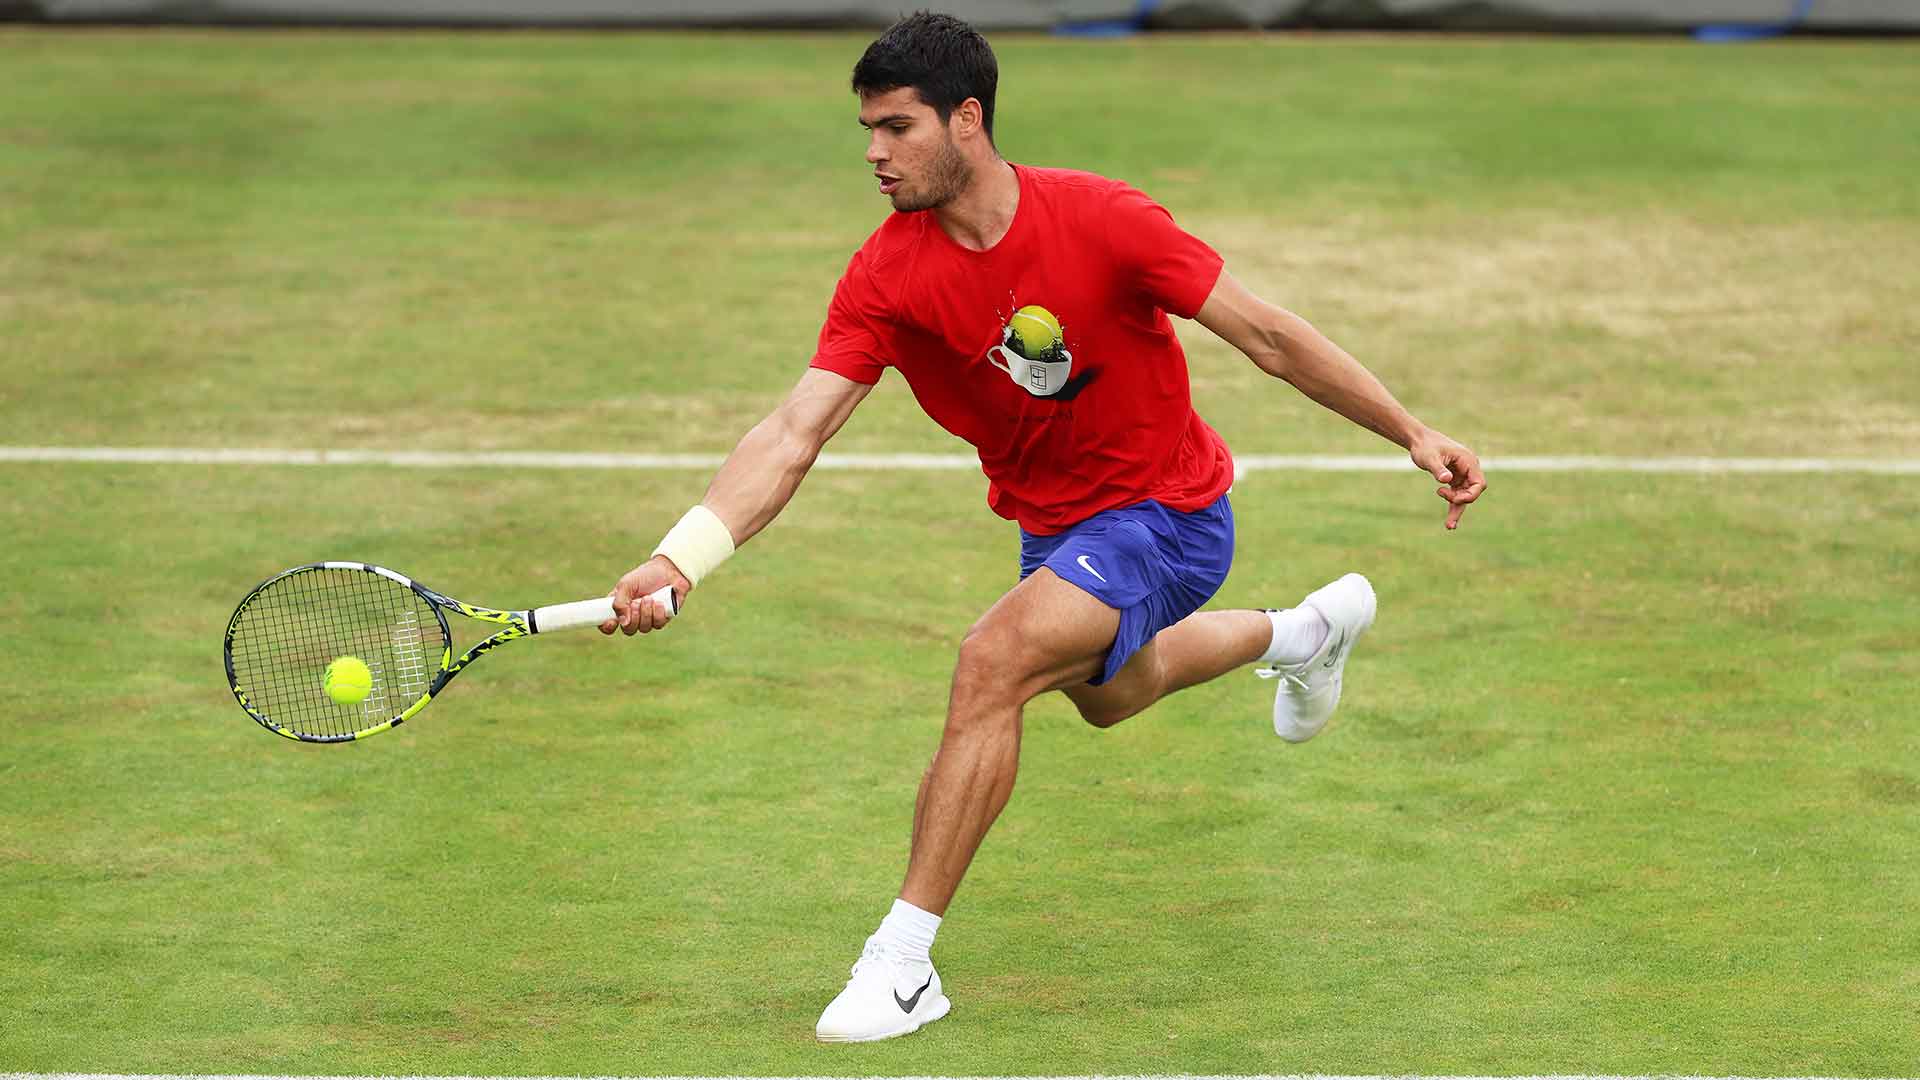 Carlos Alcaraz will face qualifier Arthur Fils in the first round at The Queen's Club.